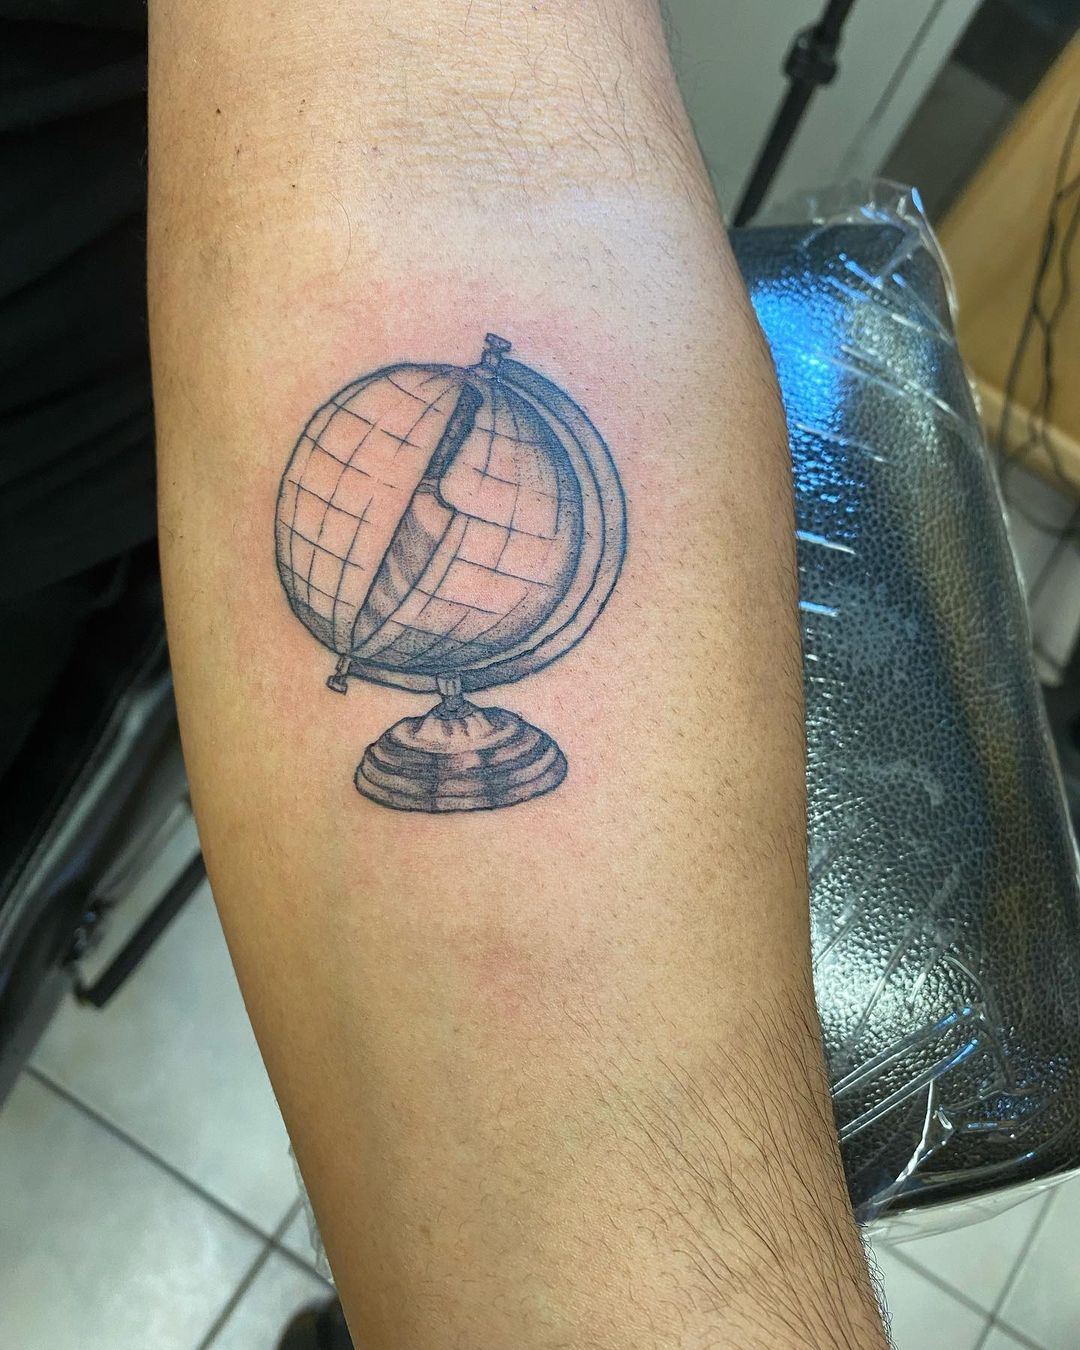 Tattoo of a globe by Haley Dillon